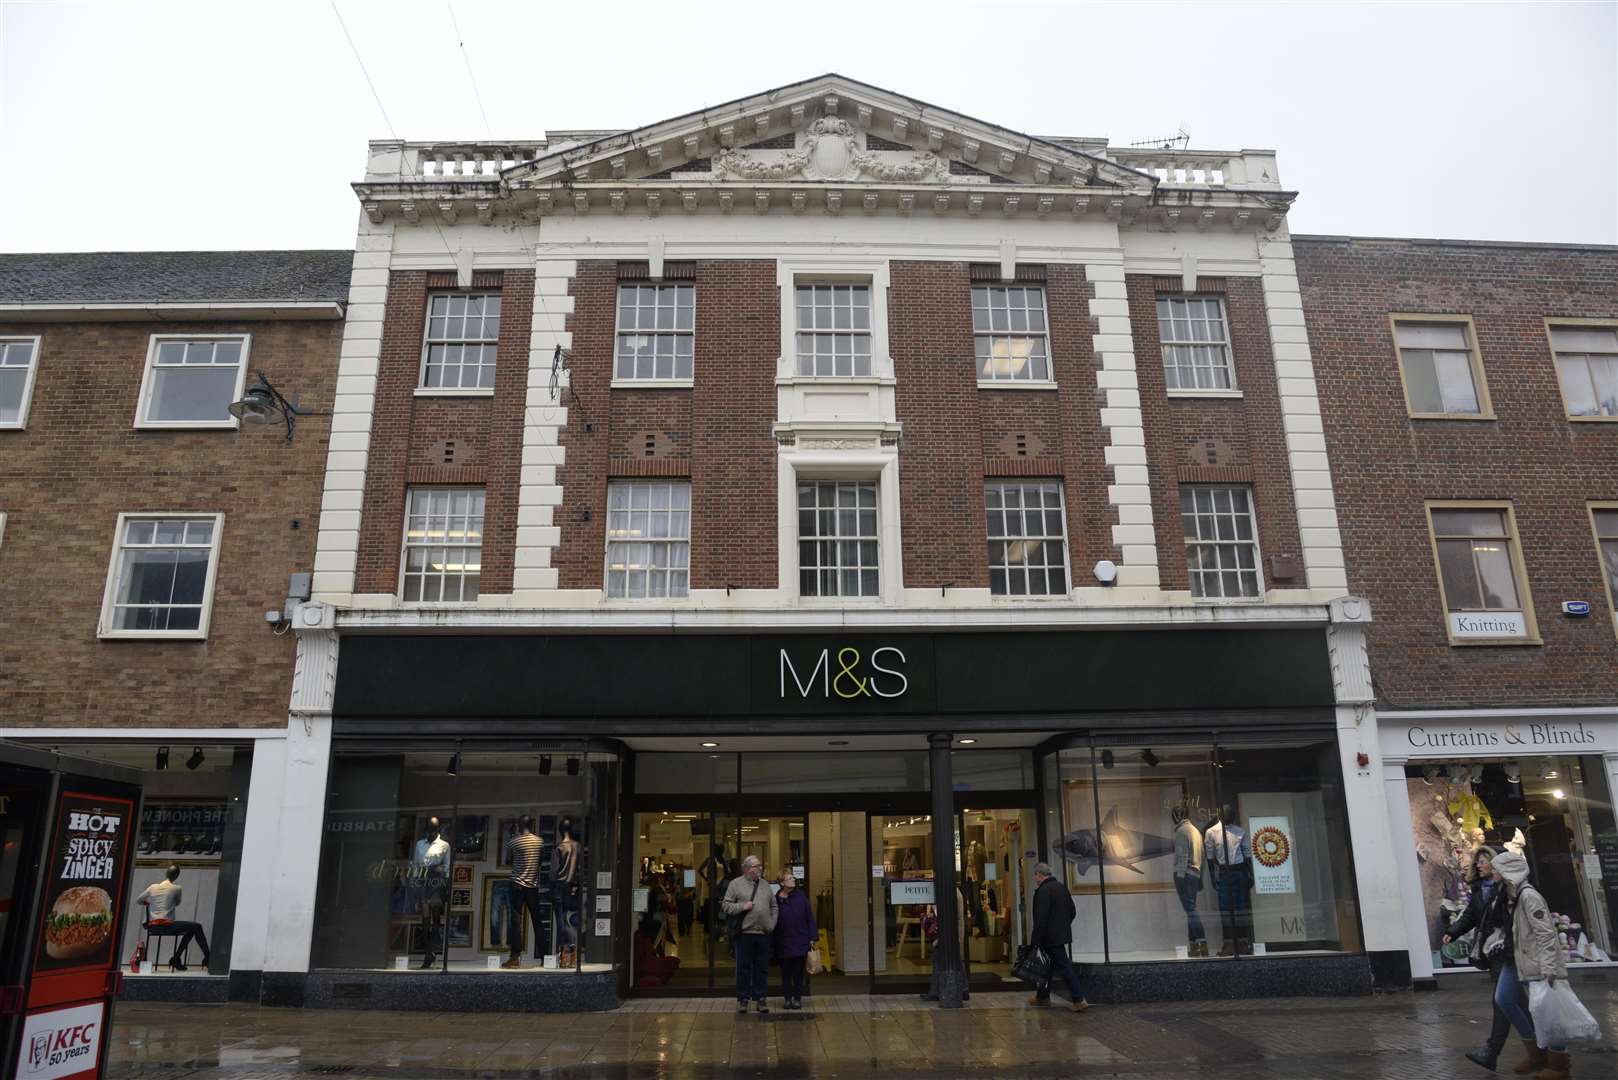 The front of Marks and Spencer in Canterbury